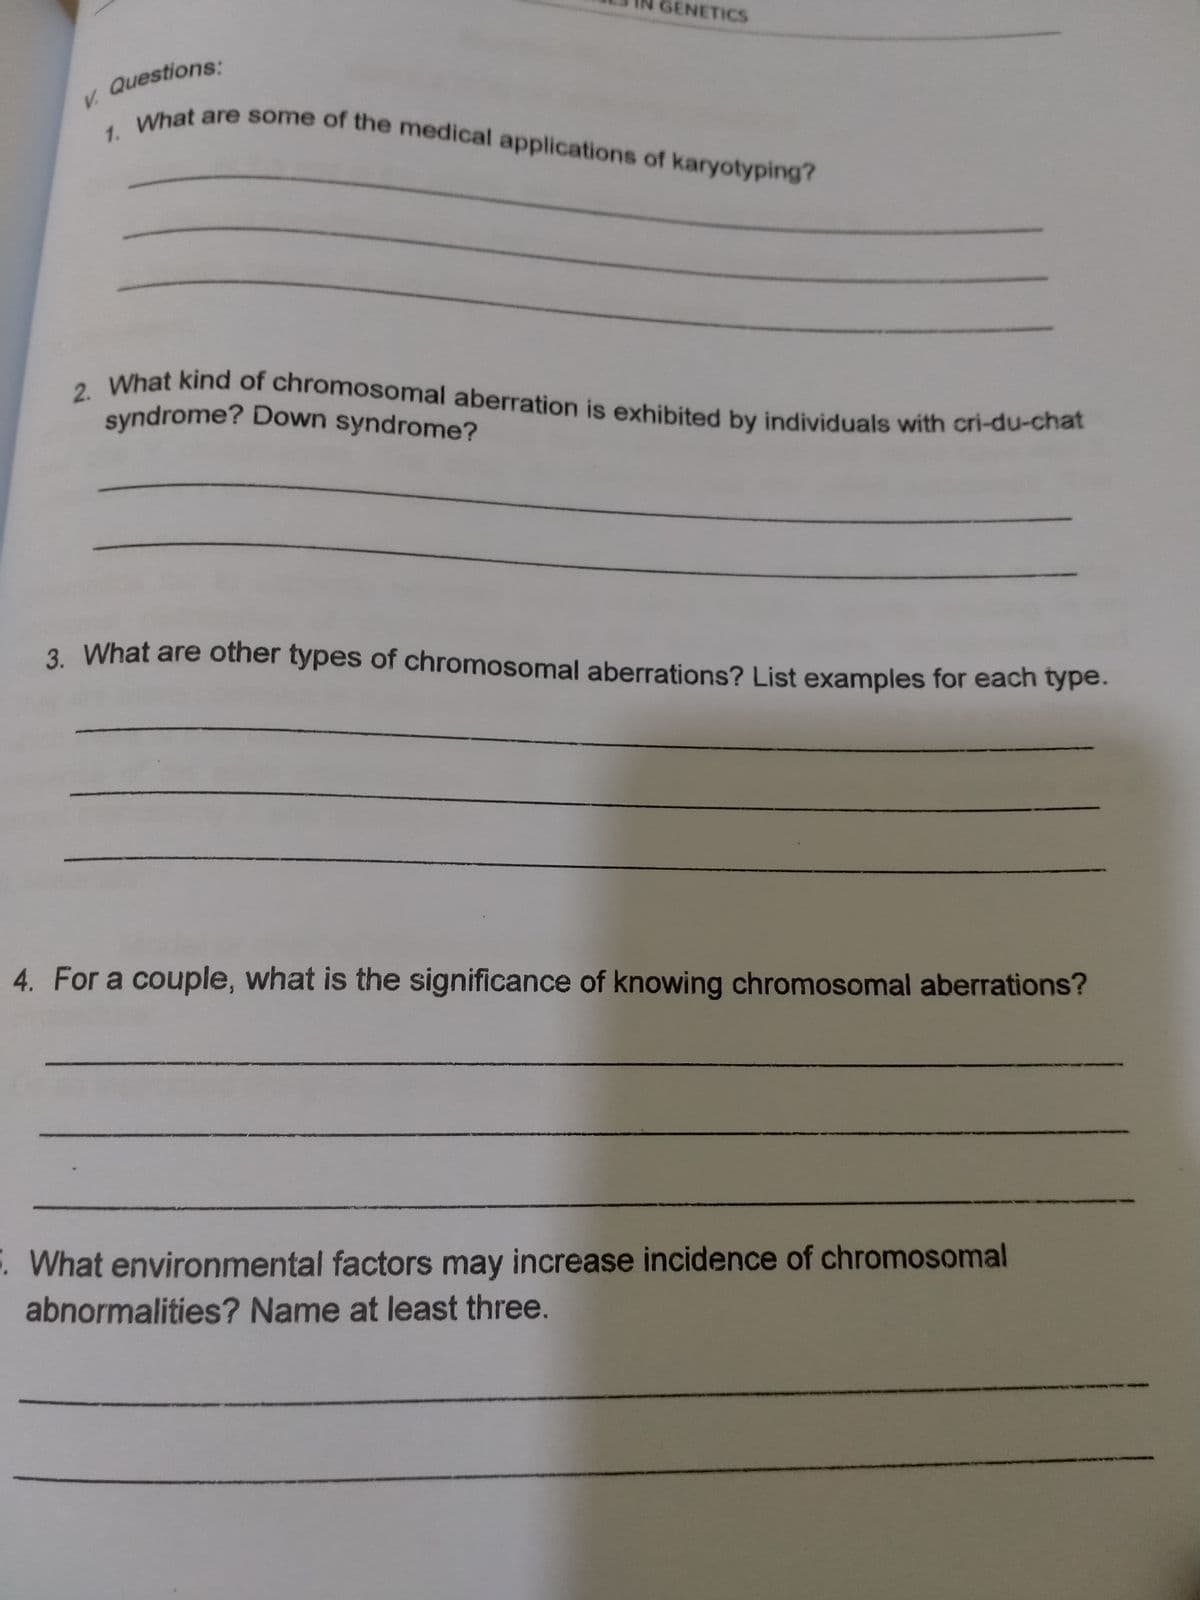 1. What are some of the medical applications of karyotyping?
GENETICS
syndrome? Down syndrome?
2. What kind of chromosomal aberration is exhibited by individuals with cri-du-chat
V. Questions:
tet are some of the medical applications of karyotyping?
1.
3. What are other types of chromosomal aberrations? List examples for each type.
4. For a couple, what is the significance of knowing chromosomal aberrations?
What environmental factors may increase incidence of chromosomal
abnormalities? Name at least three.
